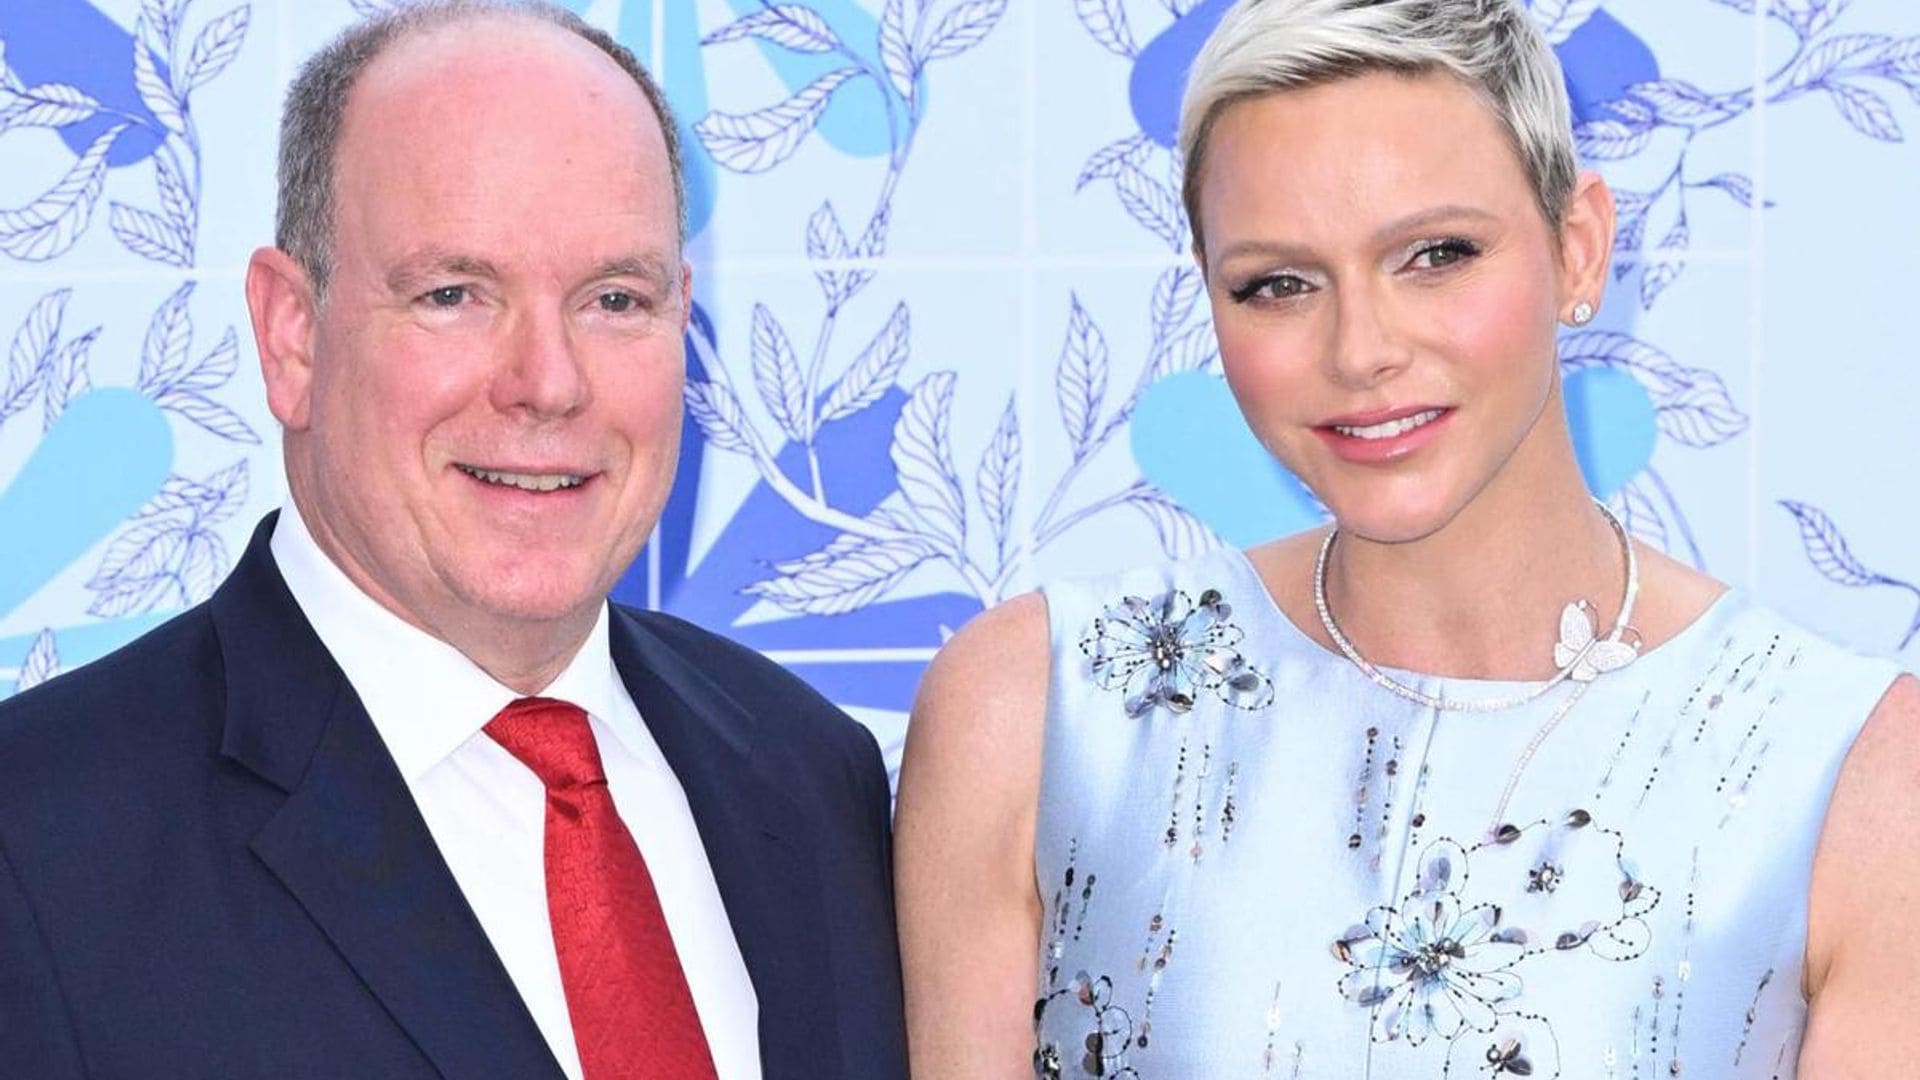 Princess Charlene attends gala in Monaco with Prince Albert